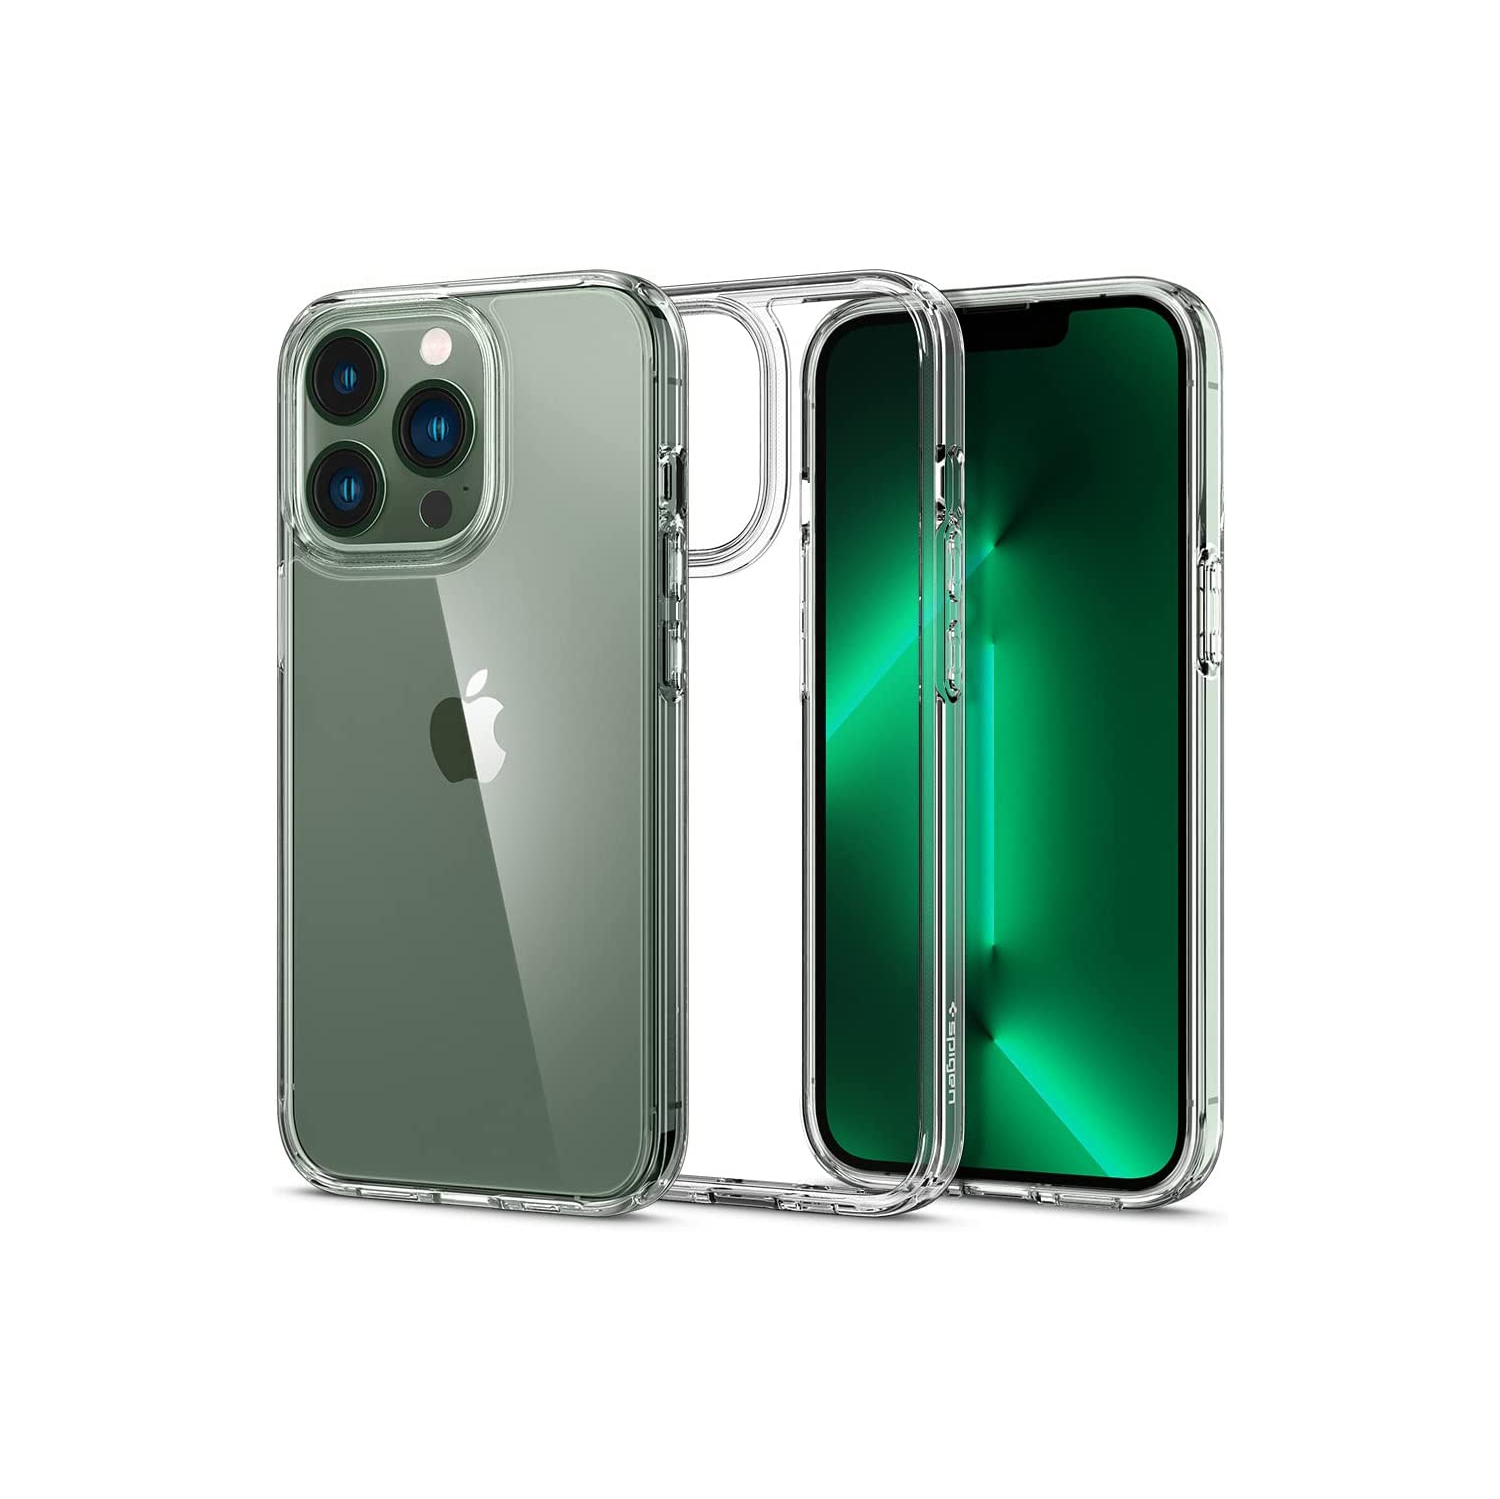 Spigen Ultra Hybrid [Anti-Yellowing Technology] Designed for iPhone 13 Pro Case (2021) - Crystal Clear